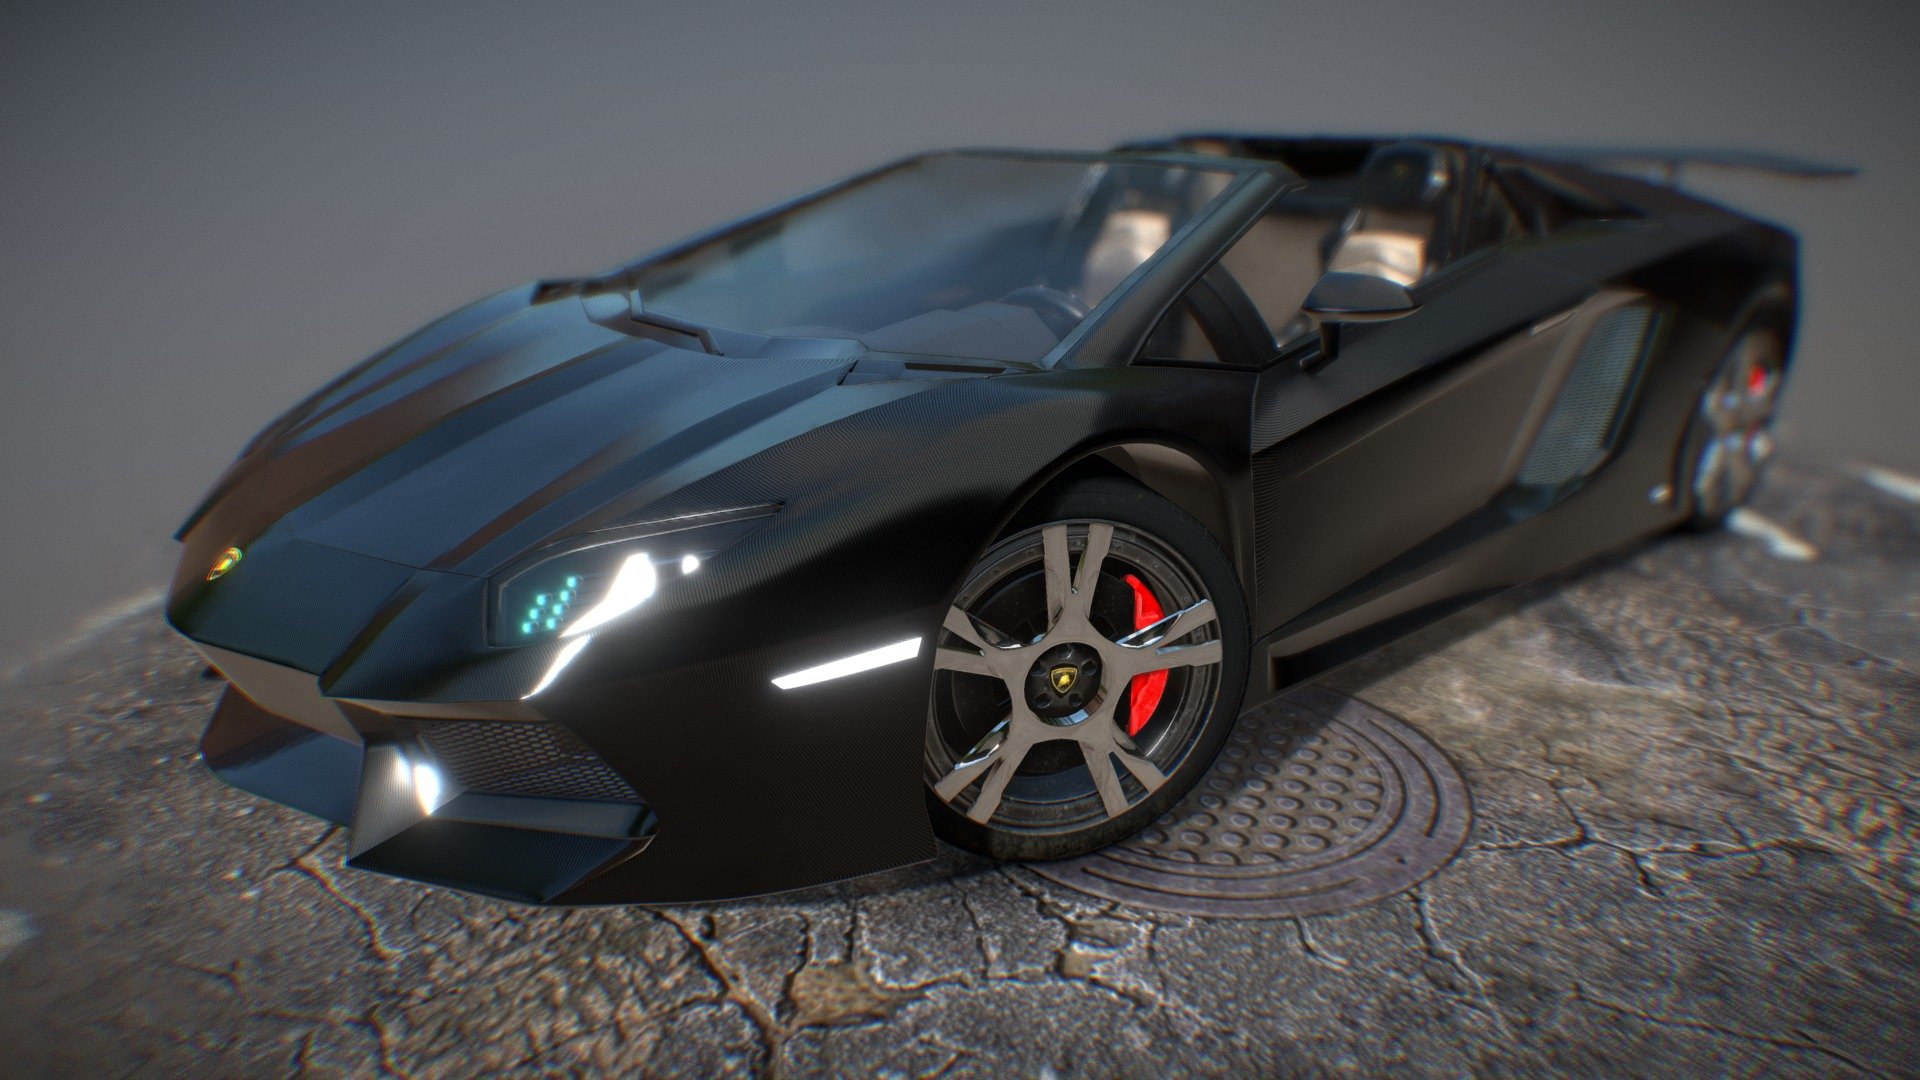 Personal interpretation of an old lamborghini 3D model with new improved shapes and PBR materials, created in maya 2017, textured in substance painter 2.6.2 and cc in sp 3D settings engine 3d model